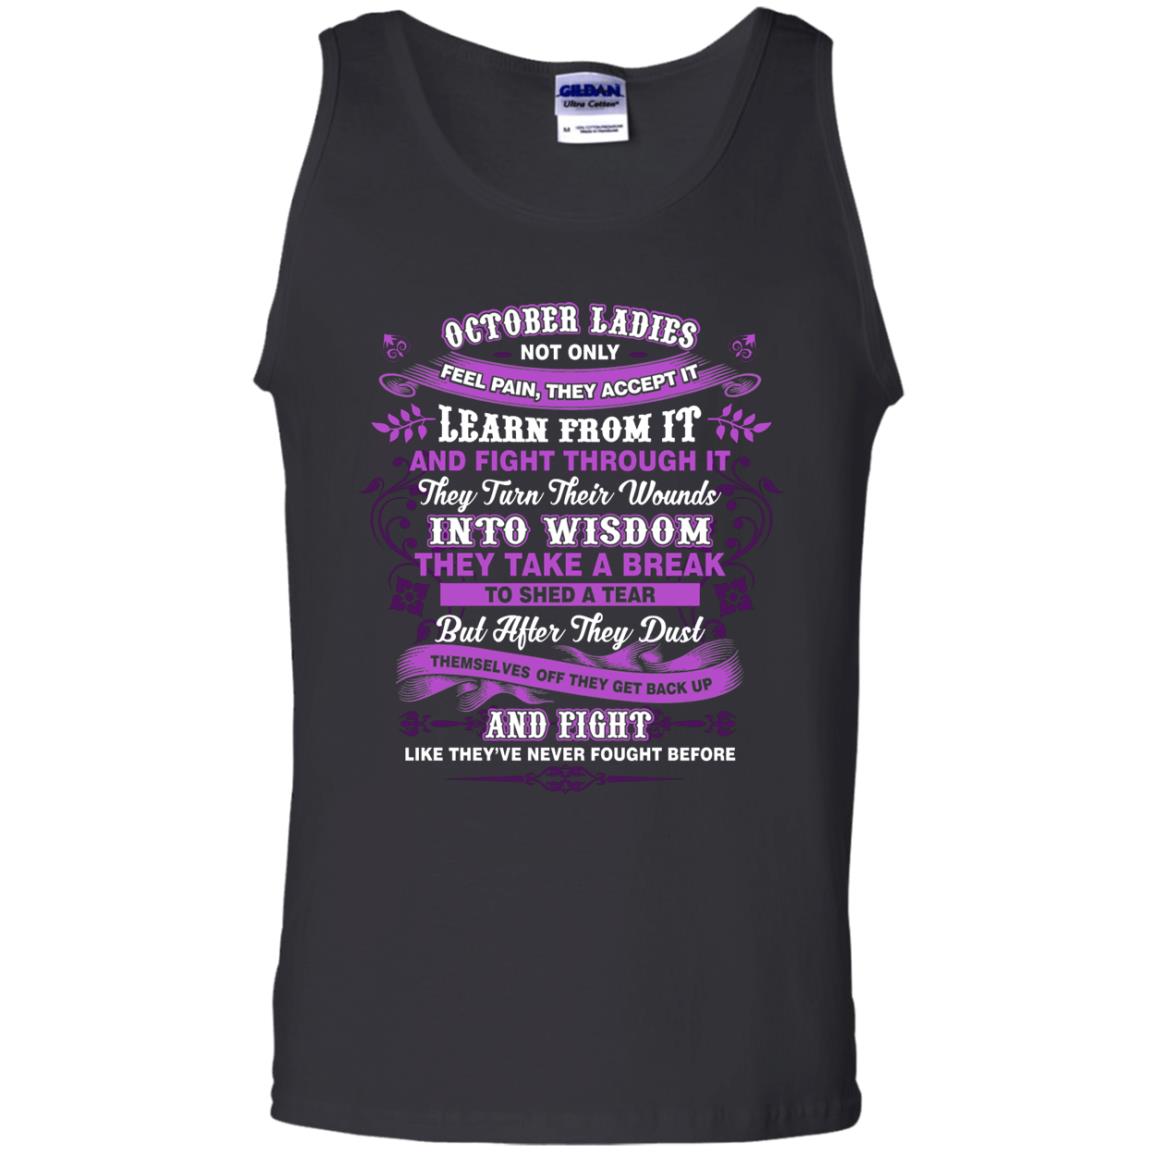 October Ladies Shirt Not Only Feel Pain They Accept It Learn From It They Turn Their Wounds Into WisdomG220 Gildan 100% Cotton Tank Top